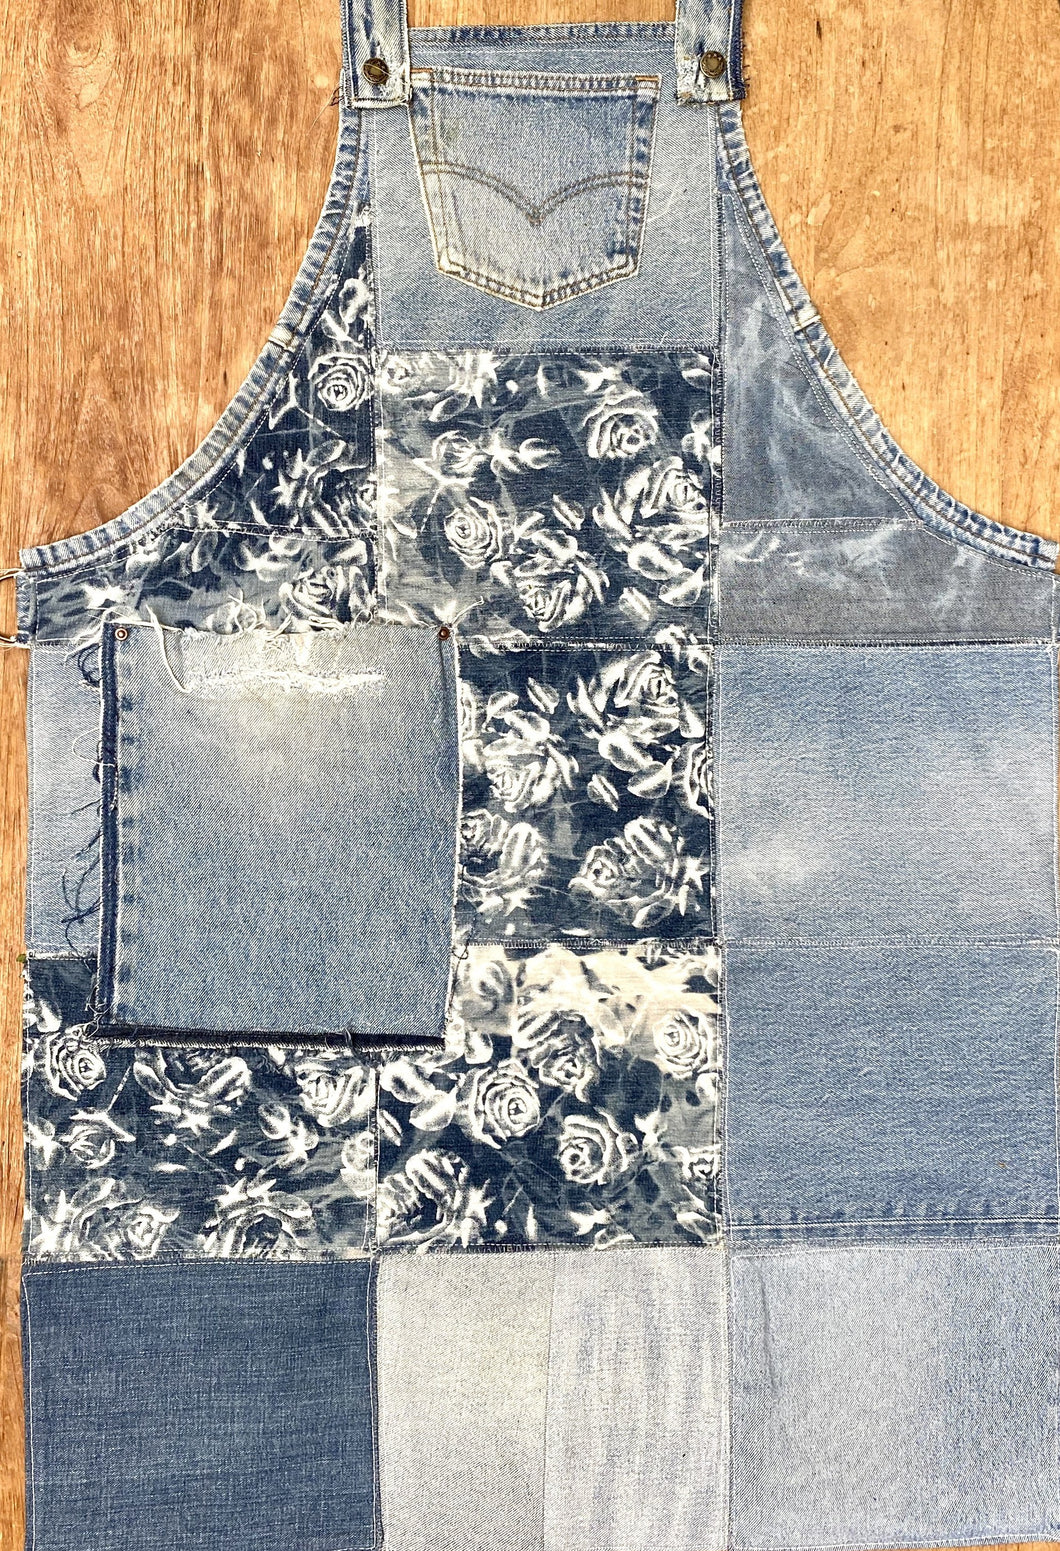 Unique Piece Denim Apron with recycled Levi's jeans and flowers